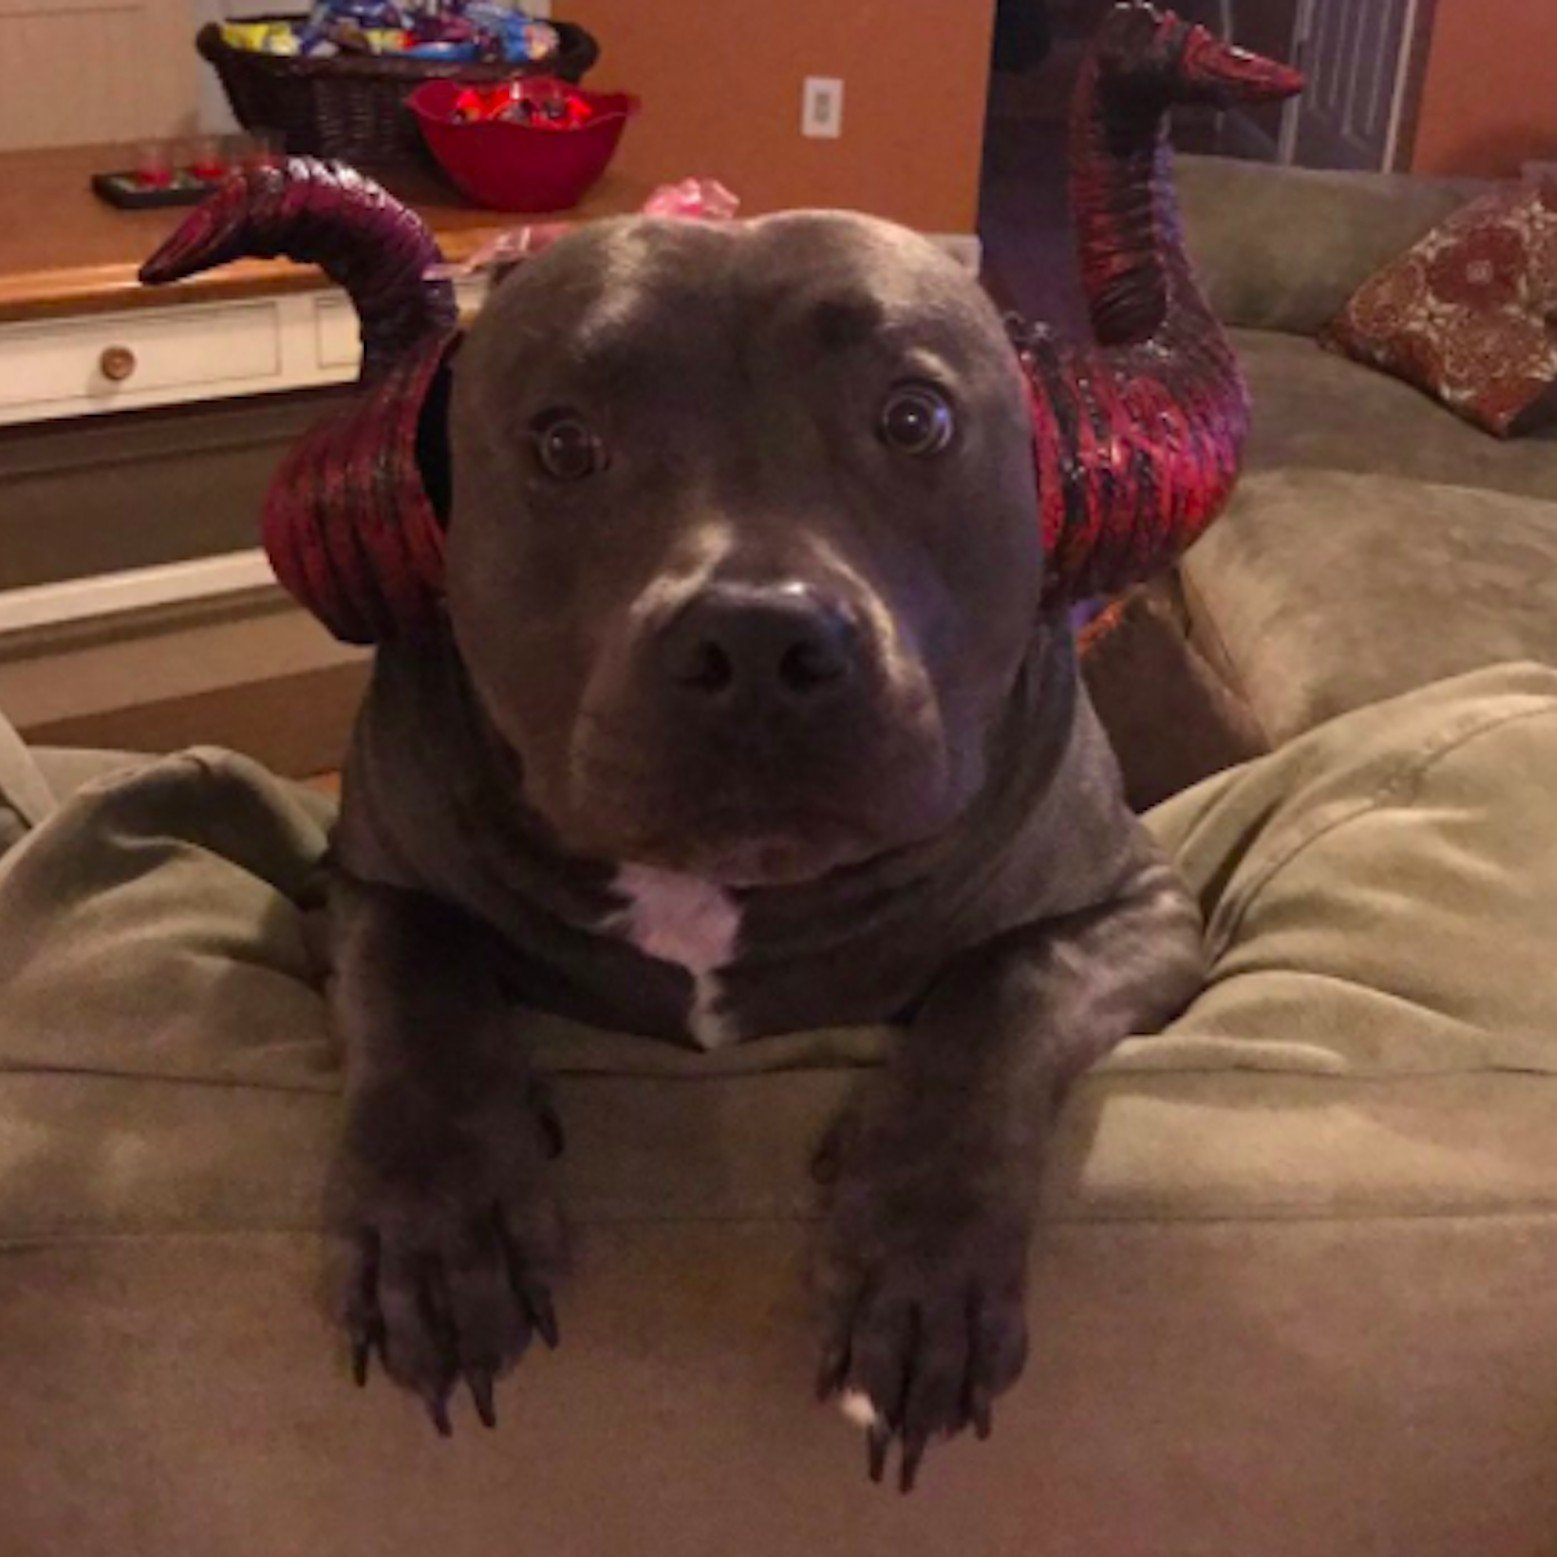 A Pit Bull wearing a Bull horns while sitting on the couch